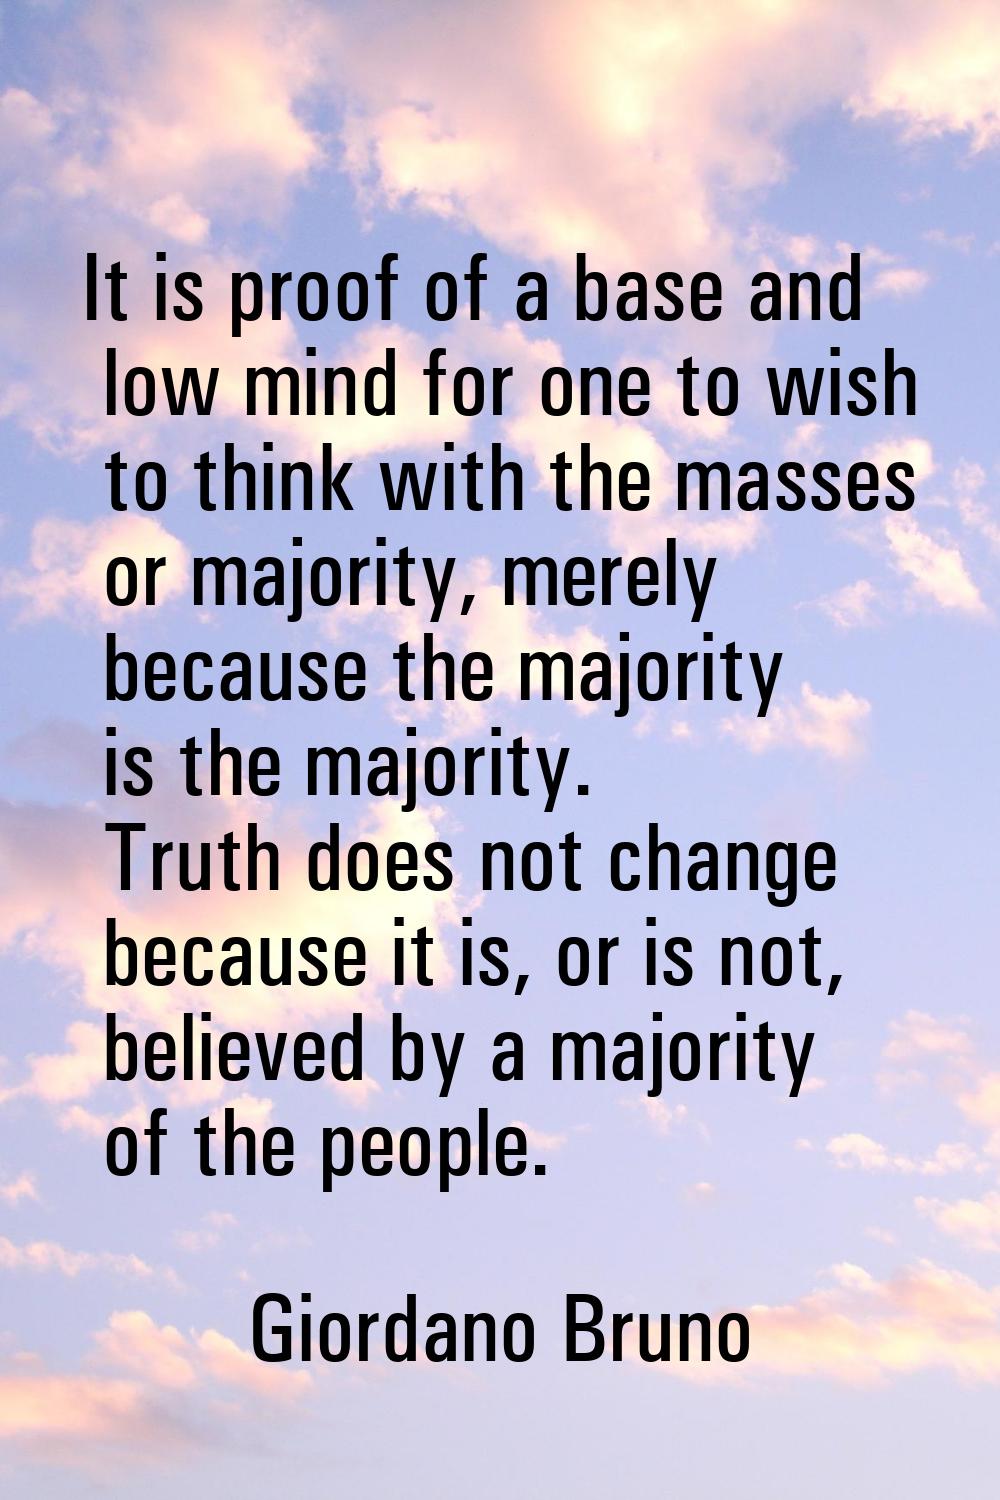 It is proof of a base and low mind for one to wish to think with the masses or majority, merely bec